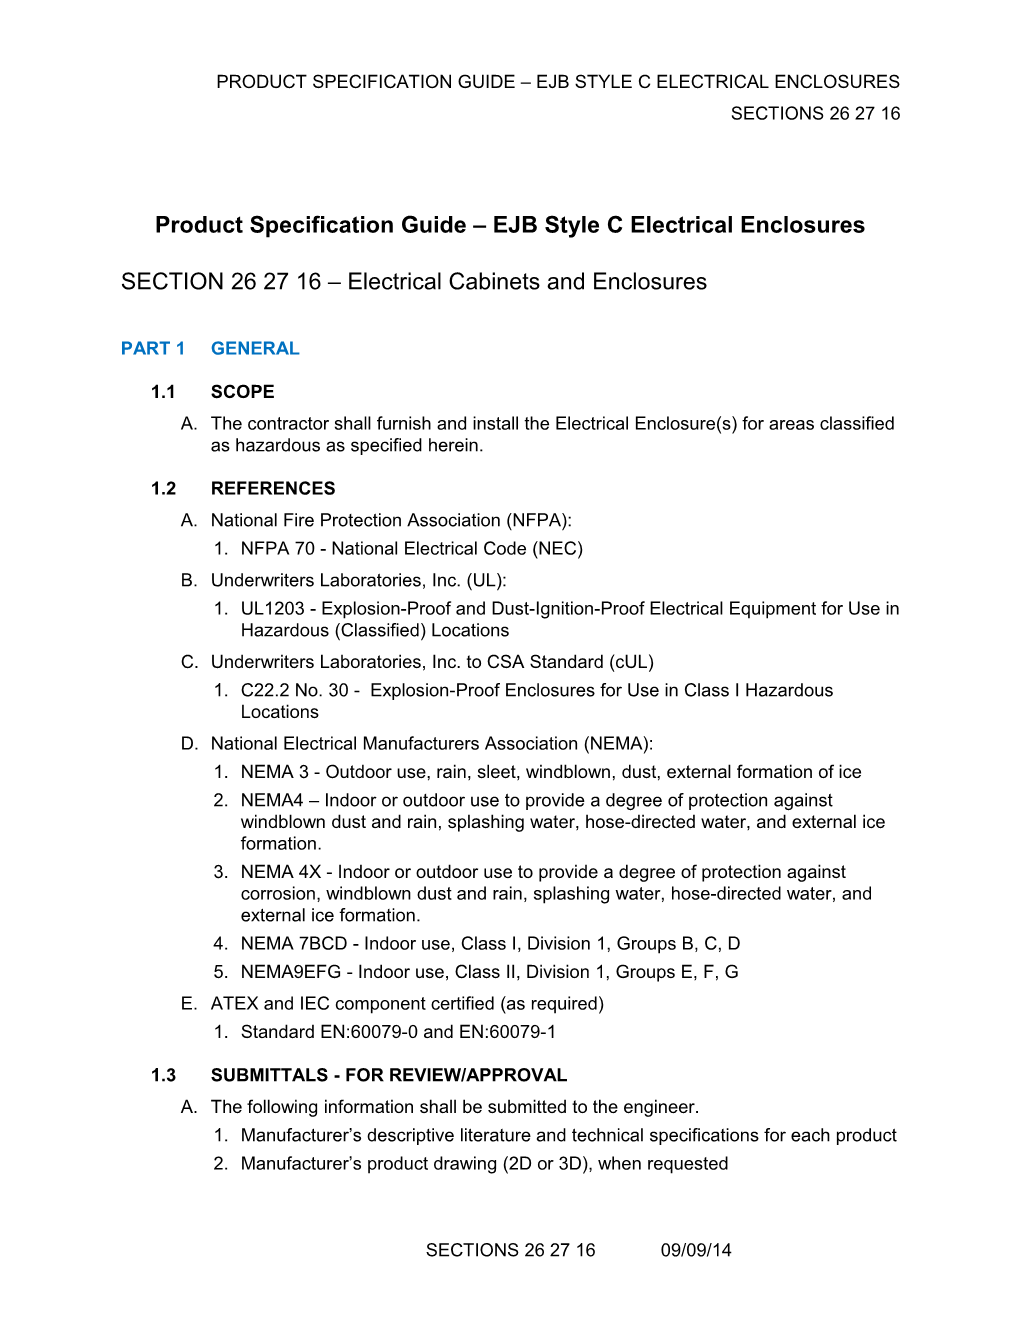 Product Specification Guide EJB Style C Electrical Enclosures